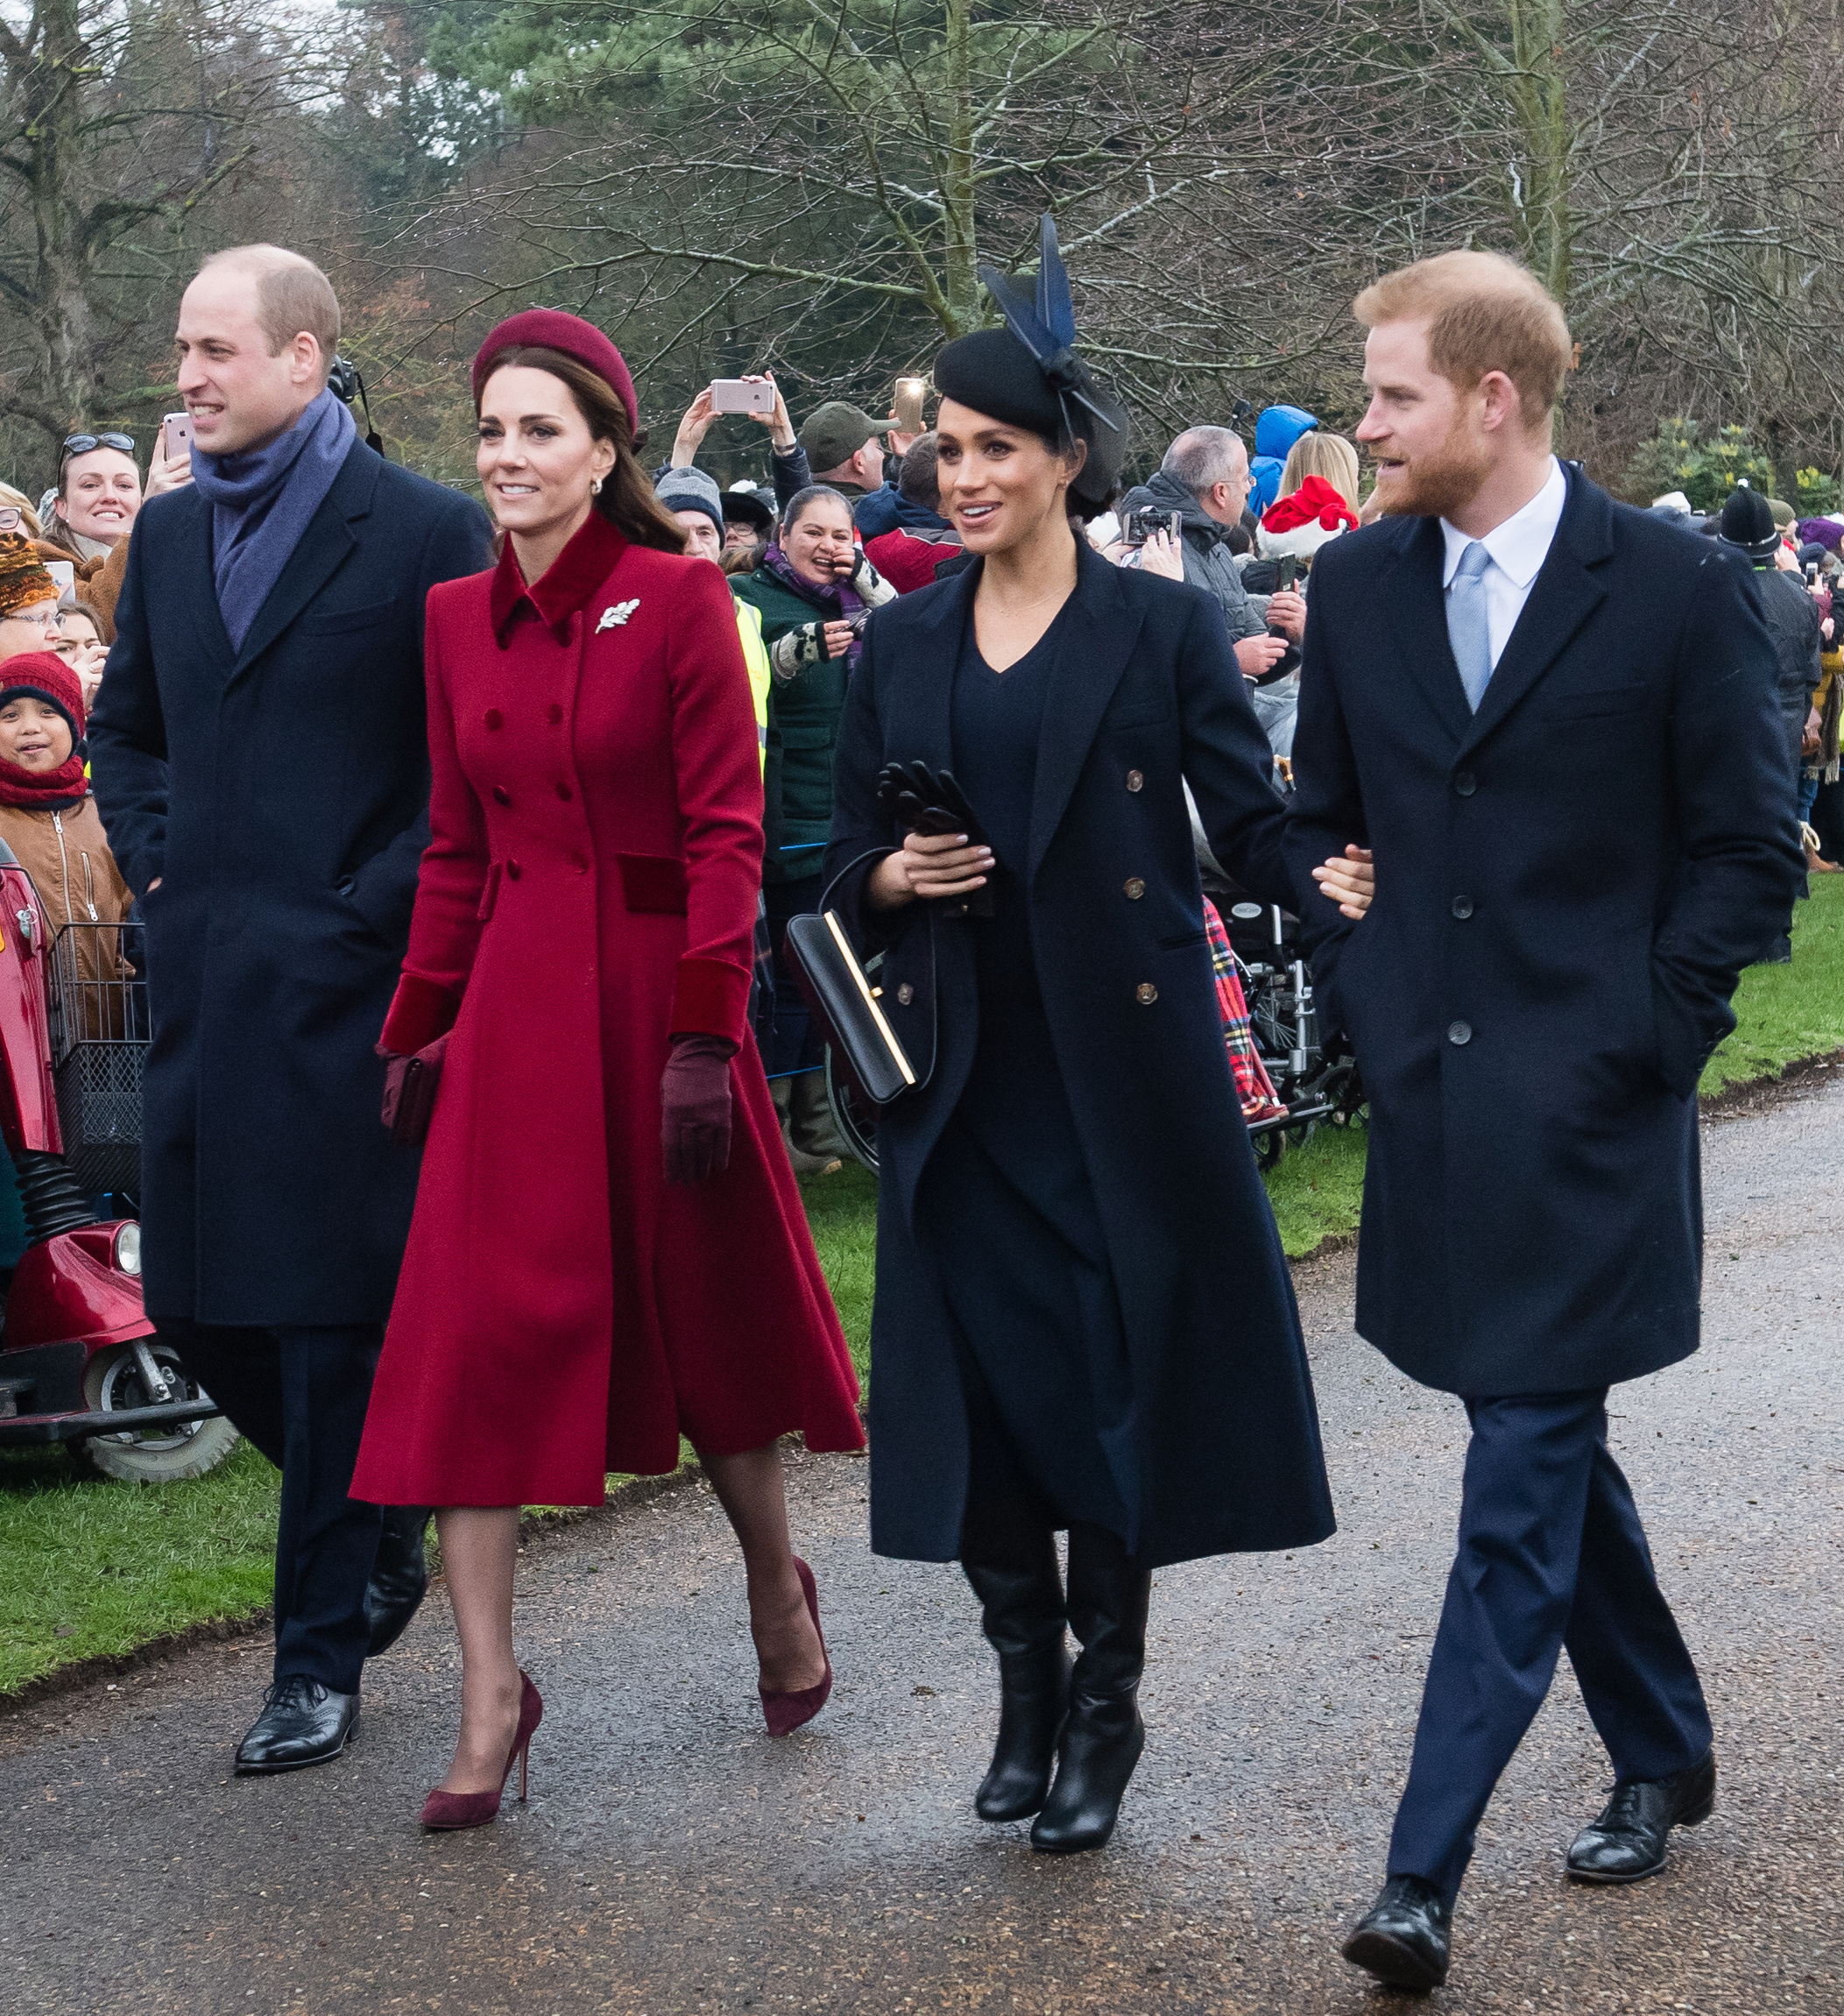 PHOTO: Prince William, Duke of Cambridge, Catherine, Duchess of Cambridge, Meghan, Duchess of Sussex and Prince Harry, Duke of Sussex attend Christmas Day Church service at Church of St Mary Magdalene, Dec. 25, 2018 in King's Lynn, England.